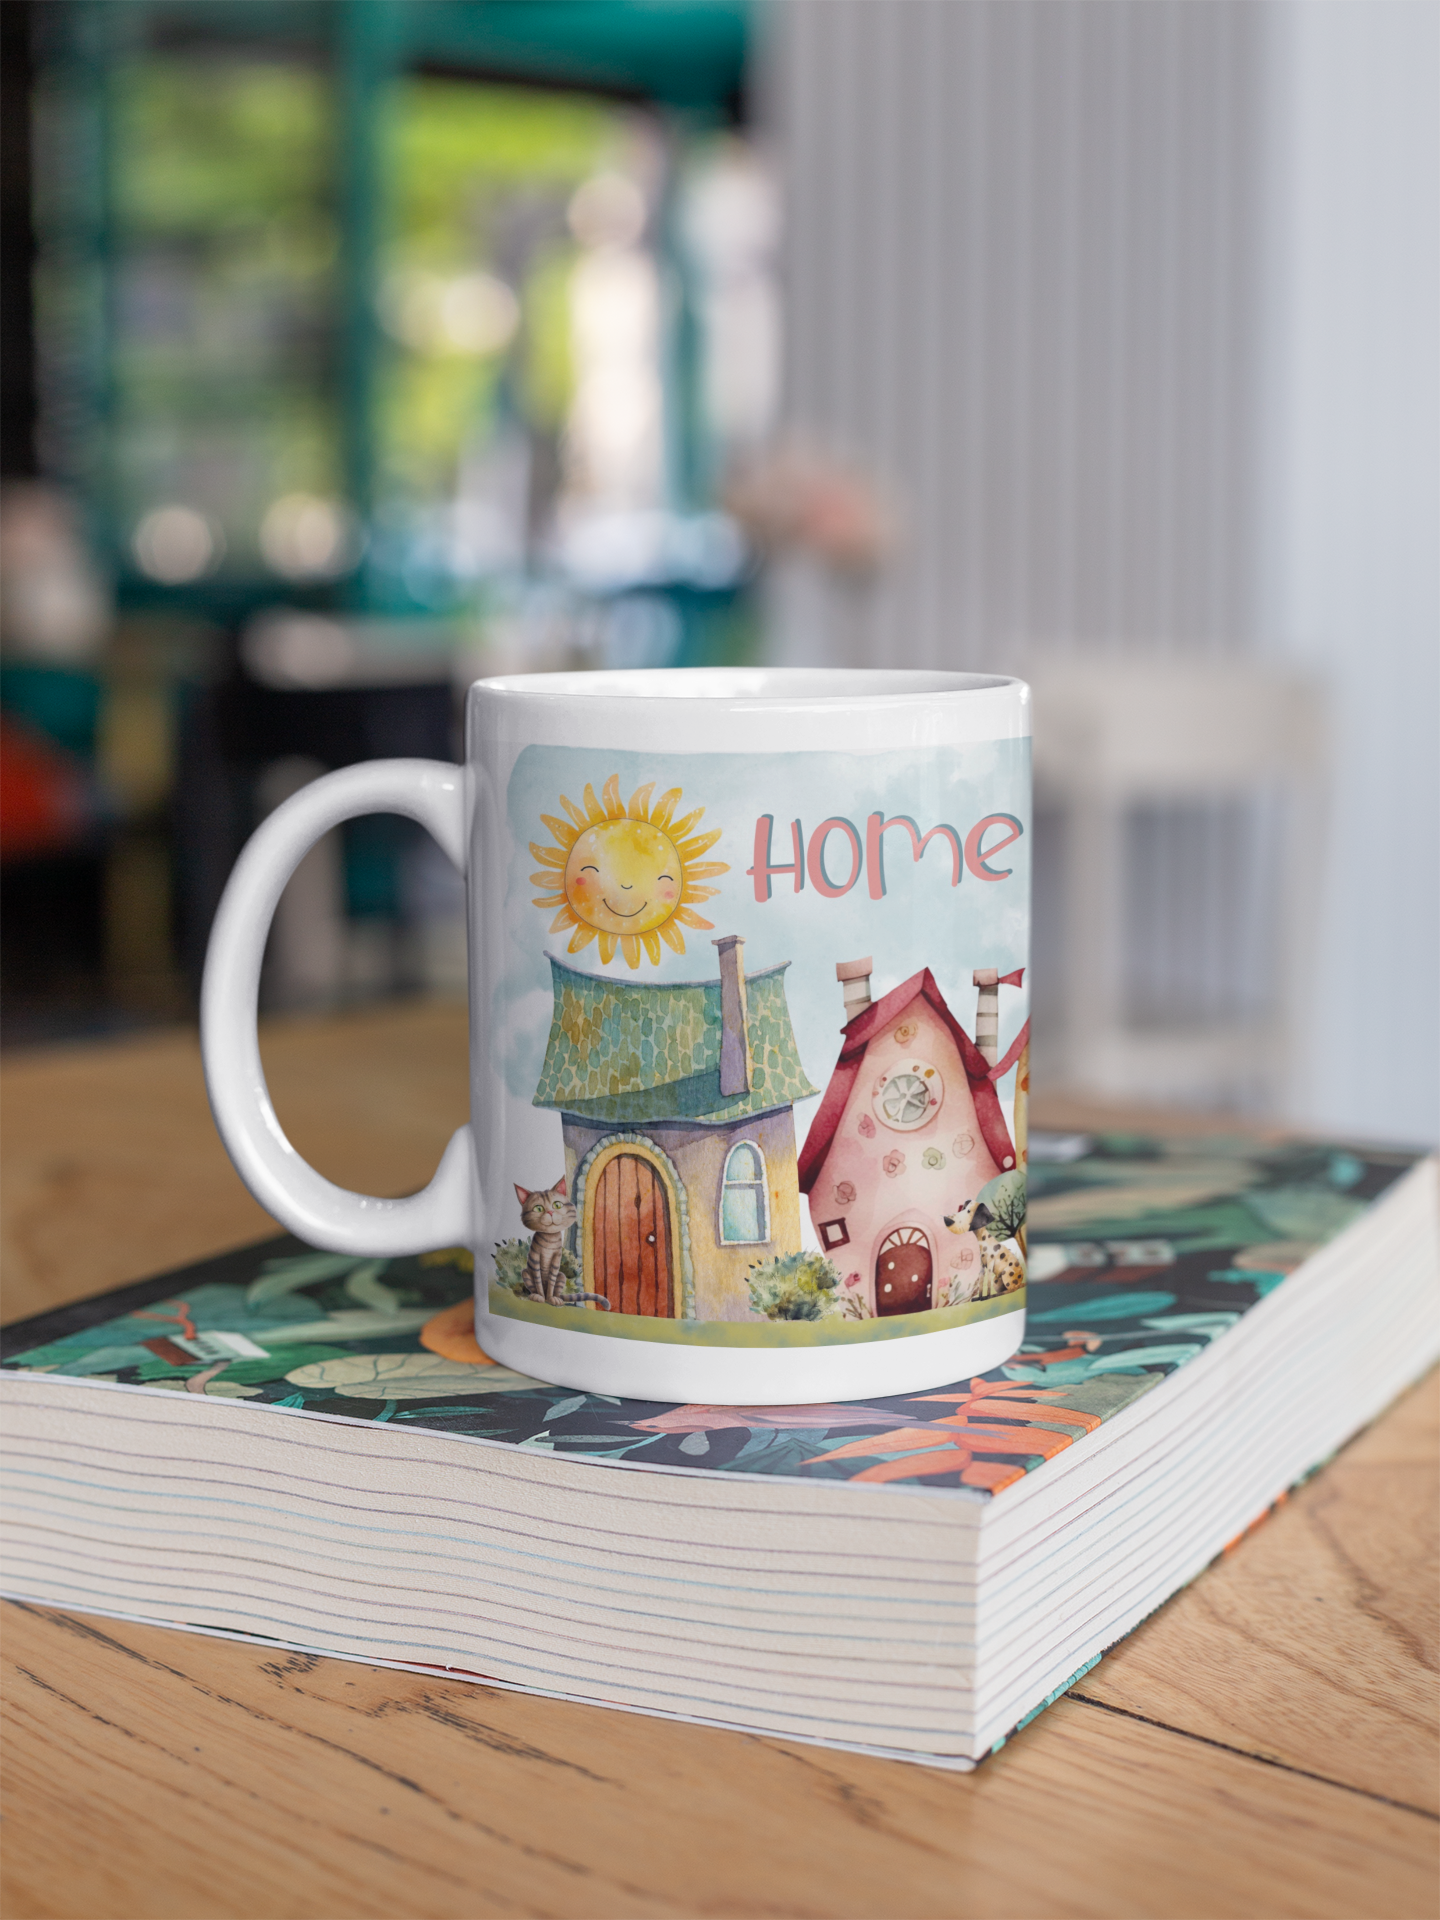 Home Sweet Home Comic Collection Art Personalised Ceramic Mug Gift Idea